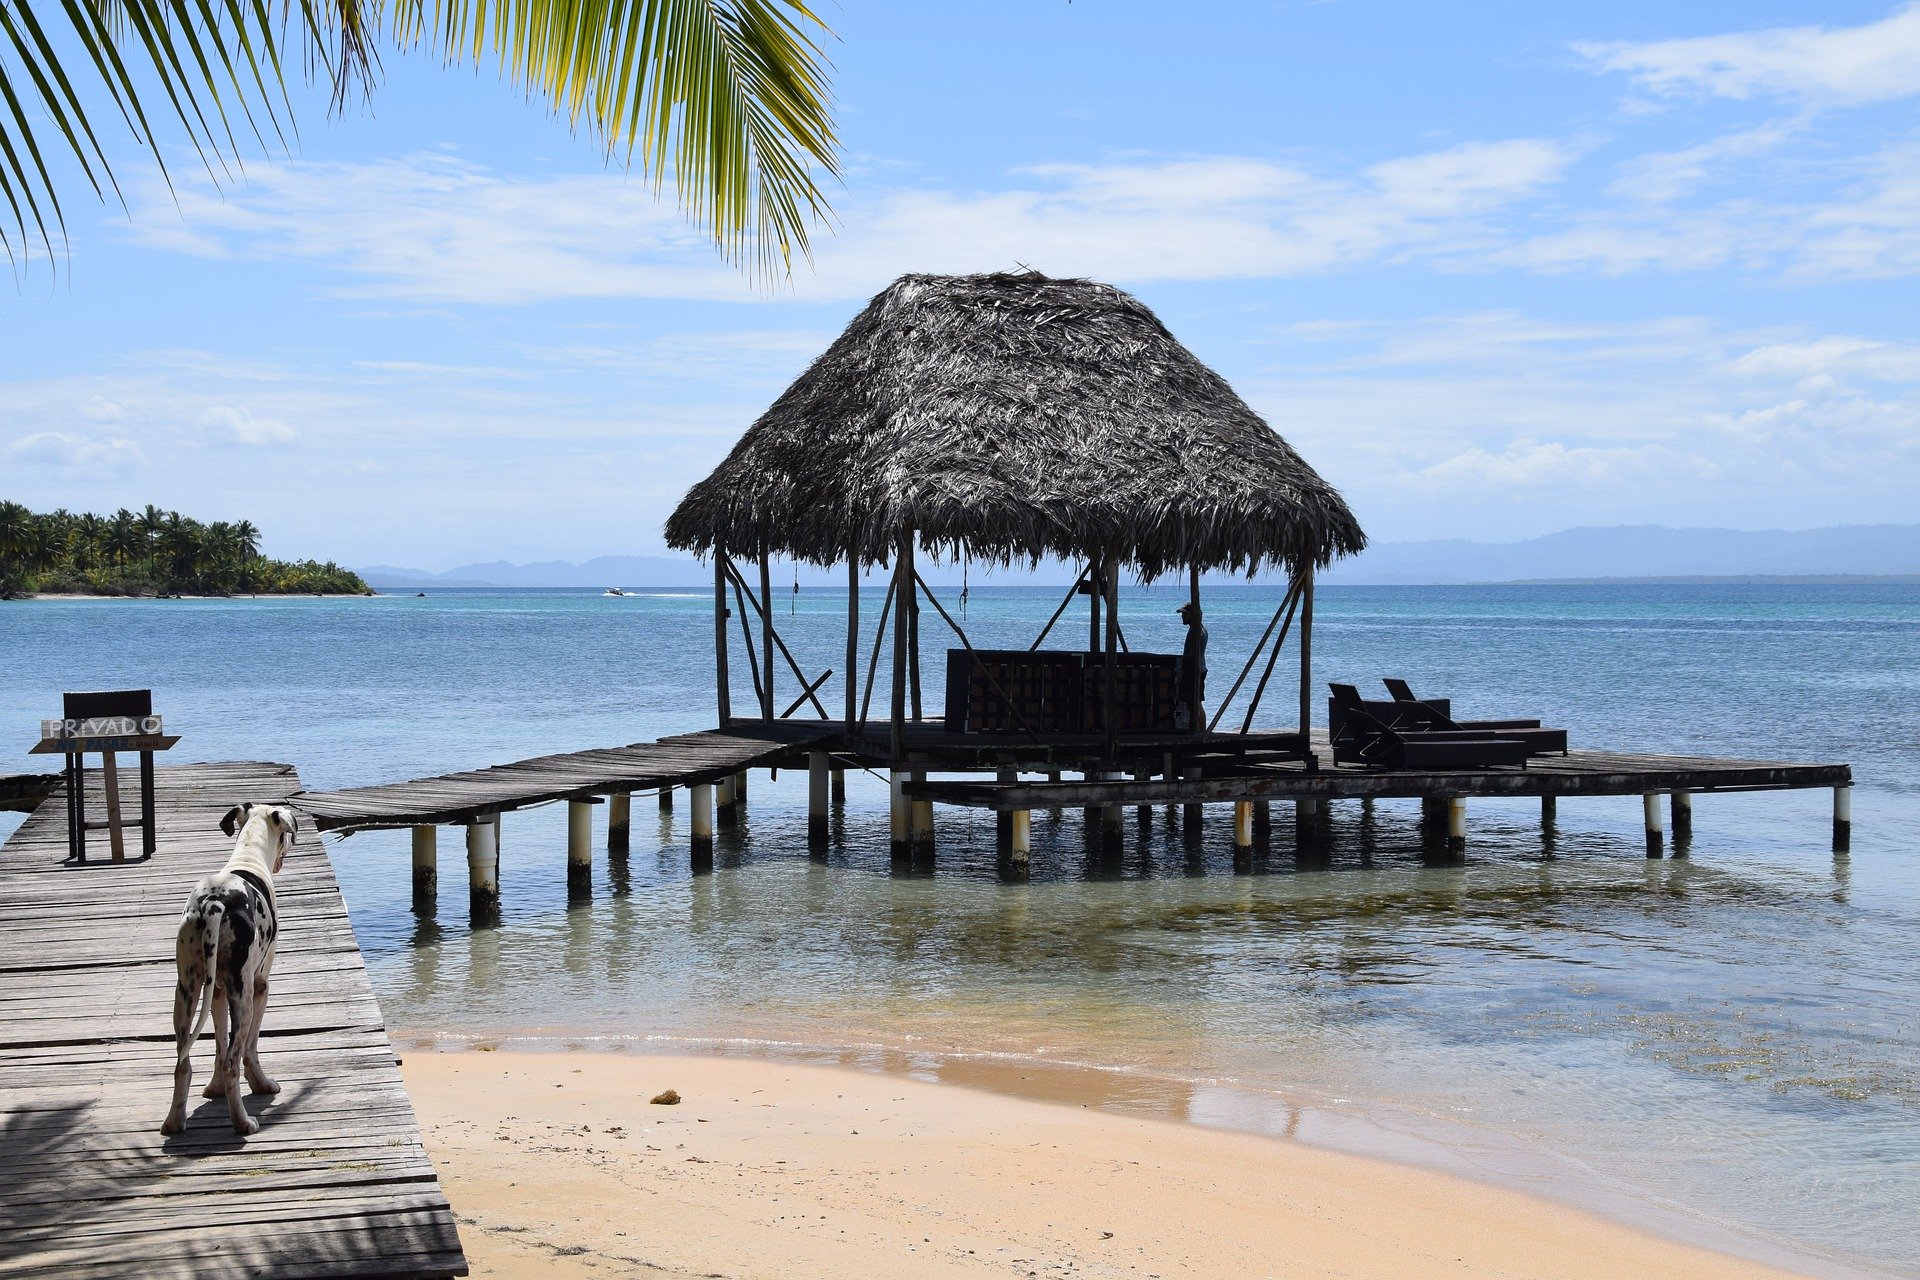 How To Get From Panama City Airport To Bocas Del Toro - All Possible Ways